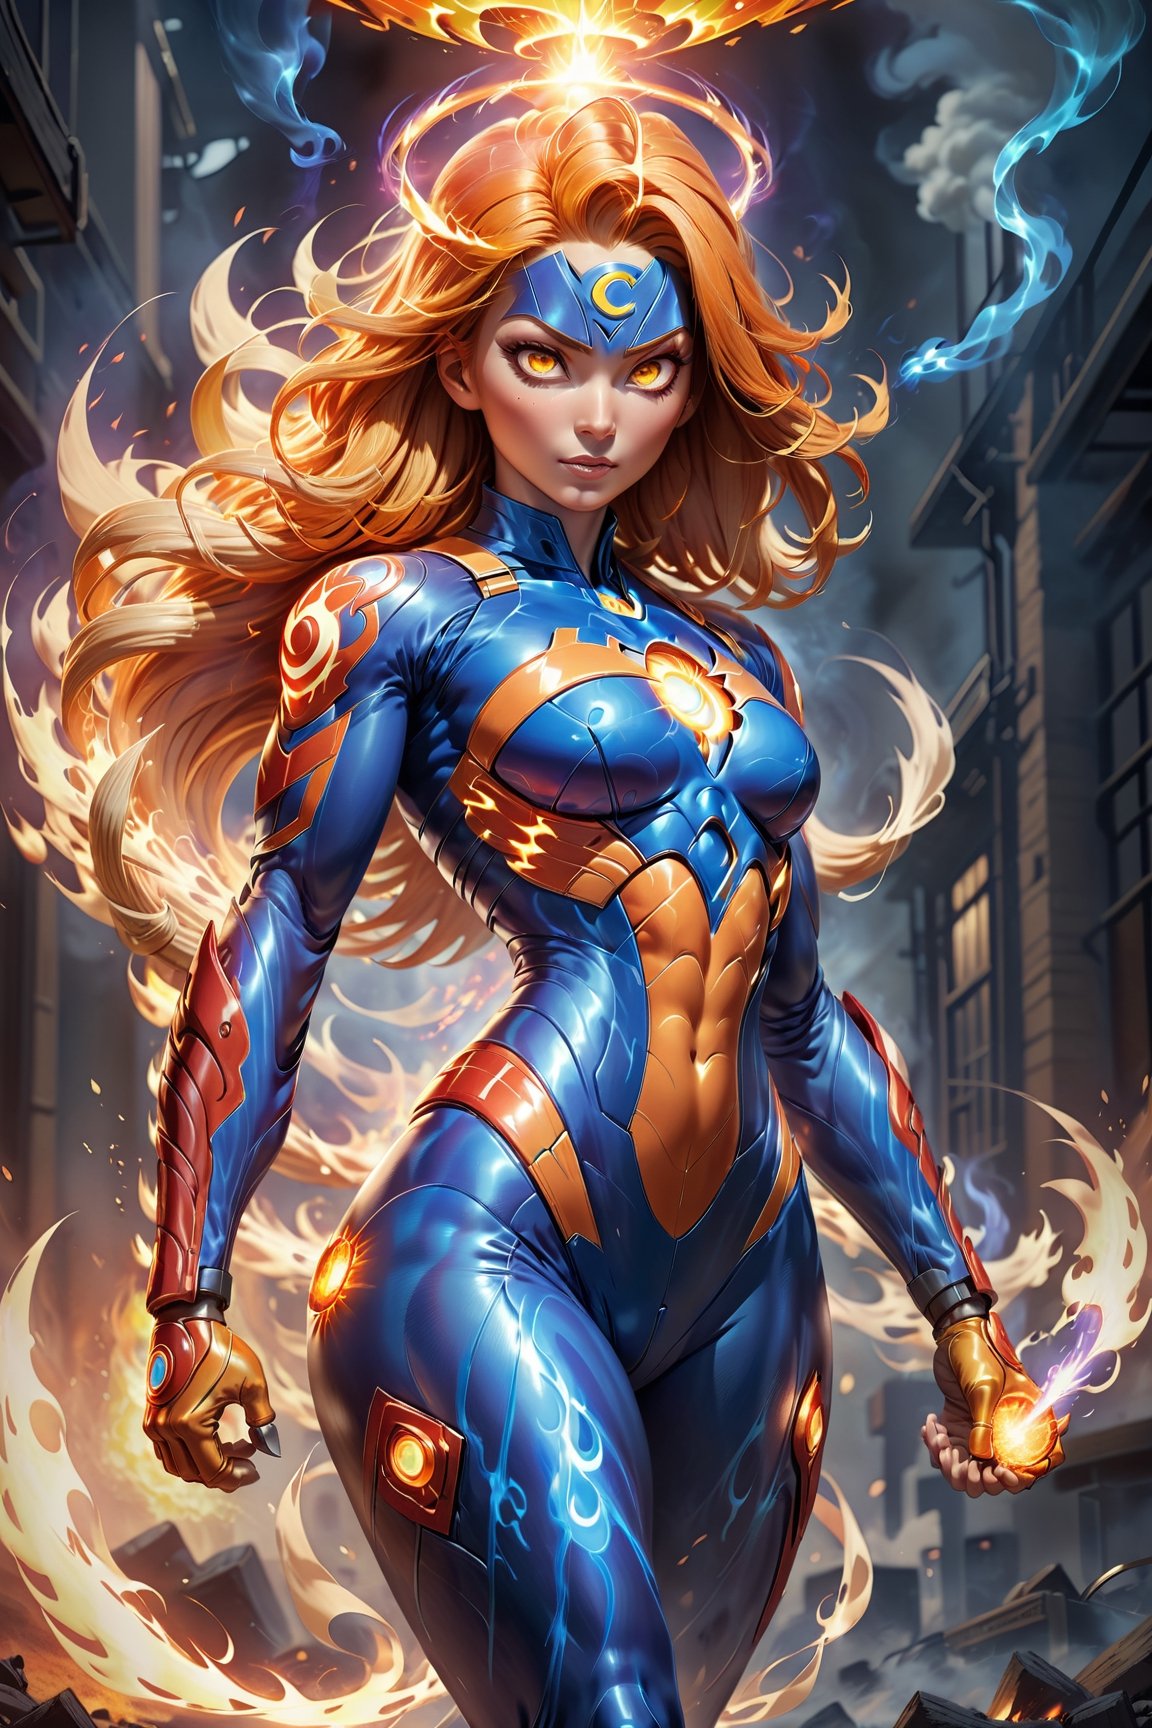 Imagine a dynamic scene featuring of iconic DC Comics character, enchantress mixed lady_human torch, heroin, superhero, fire deity, muscular, athleticism, combustion, energy, smoke, ashes. Firehair. (fire Eyes:1.6). (incandescent fireball in his hands:1.6). ((concentration of fire in her upright right hand, she is prepared to attack)). ((fire lit in the palms of his hands)). Visualize him engulfed in flames, sexy pose, very big breast, swinging, radiating with fiery intensity. ((fire-colored suit with red details)). ((His body burns with great intensity, emitting light and heat, burning in flames)). Craft a prompt for a super detailed, 16k Ultra HDR image capturing the essence of Human Torch's blazing presence – perfect face, flames, and dynamic pose. (brightness, vibe, vitality, energy, halo, halo, aura:1.5), (arms wrapped in flames, fire). flashes of fire surround his body. Choose a background that complements his character, creating a cinematic masterpiece with high realism and top-notch image quality,fire element:1.5,3d toon style,xl-shanbailing-1003fire-000010:0.6,demonictech:0.1,MagmaTech:0.1,human on fire:1.2,feh:0.4,firepunch:1.3,zeldaALBW:0.1,makioze:0.4,fire_lit_DC:0.5,DonMF1re:0.5,FireAI:0.6,Cursed energy:0.5,Sci-fi ,DonMDj1nnM4g1cXL 